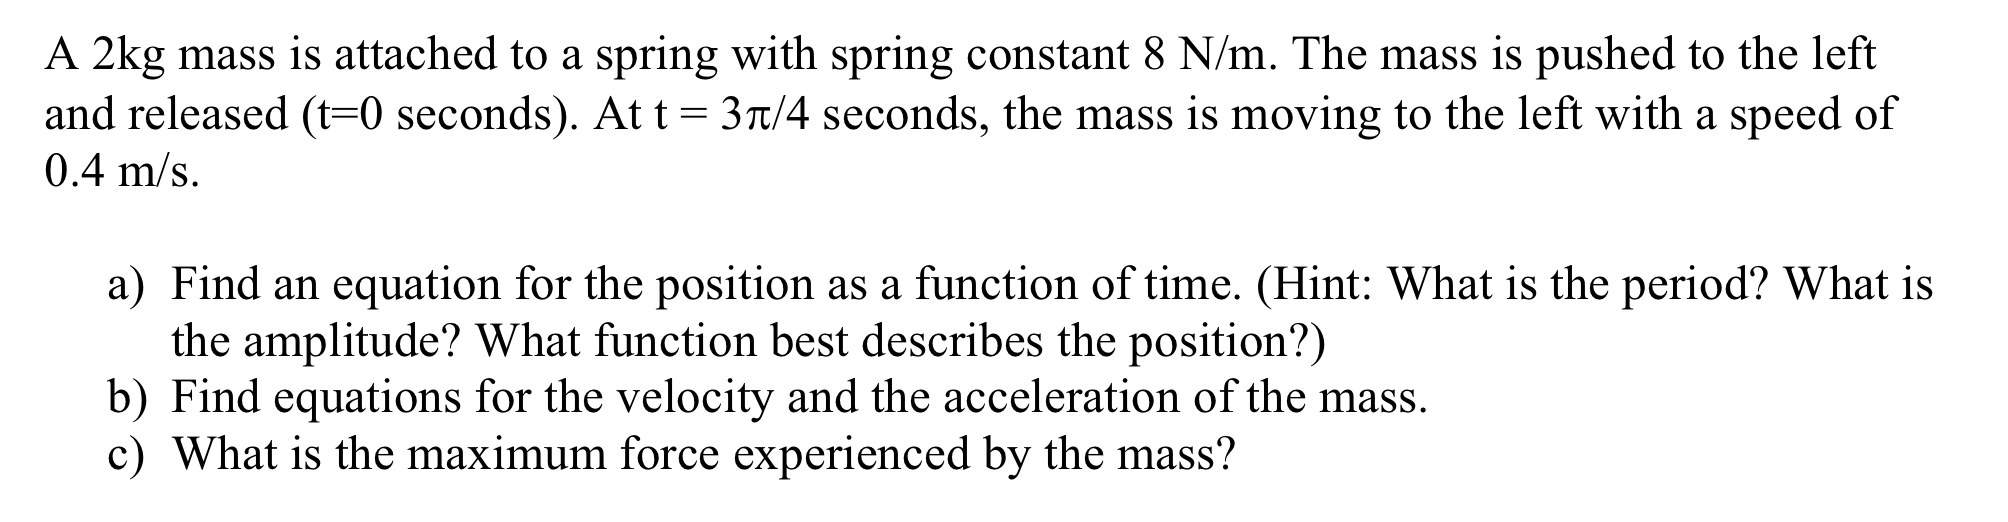 A 2kg mass is attached to a spring with spring constant 8 N/m. The mass is pushed to the left and released (t=0 seconds). At 